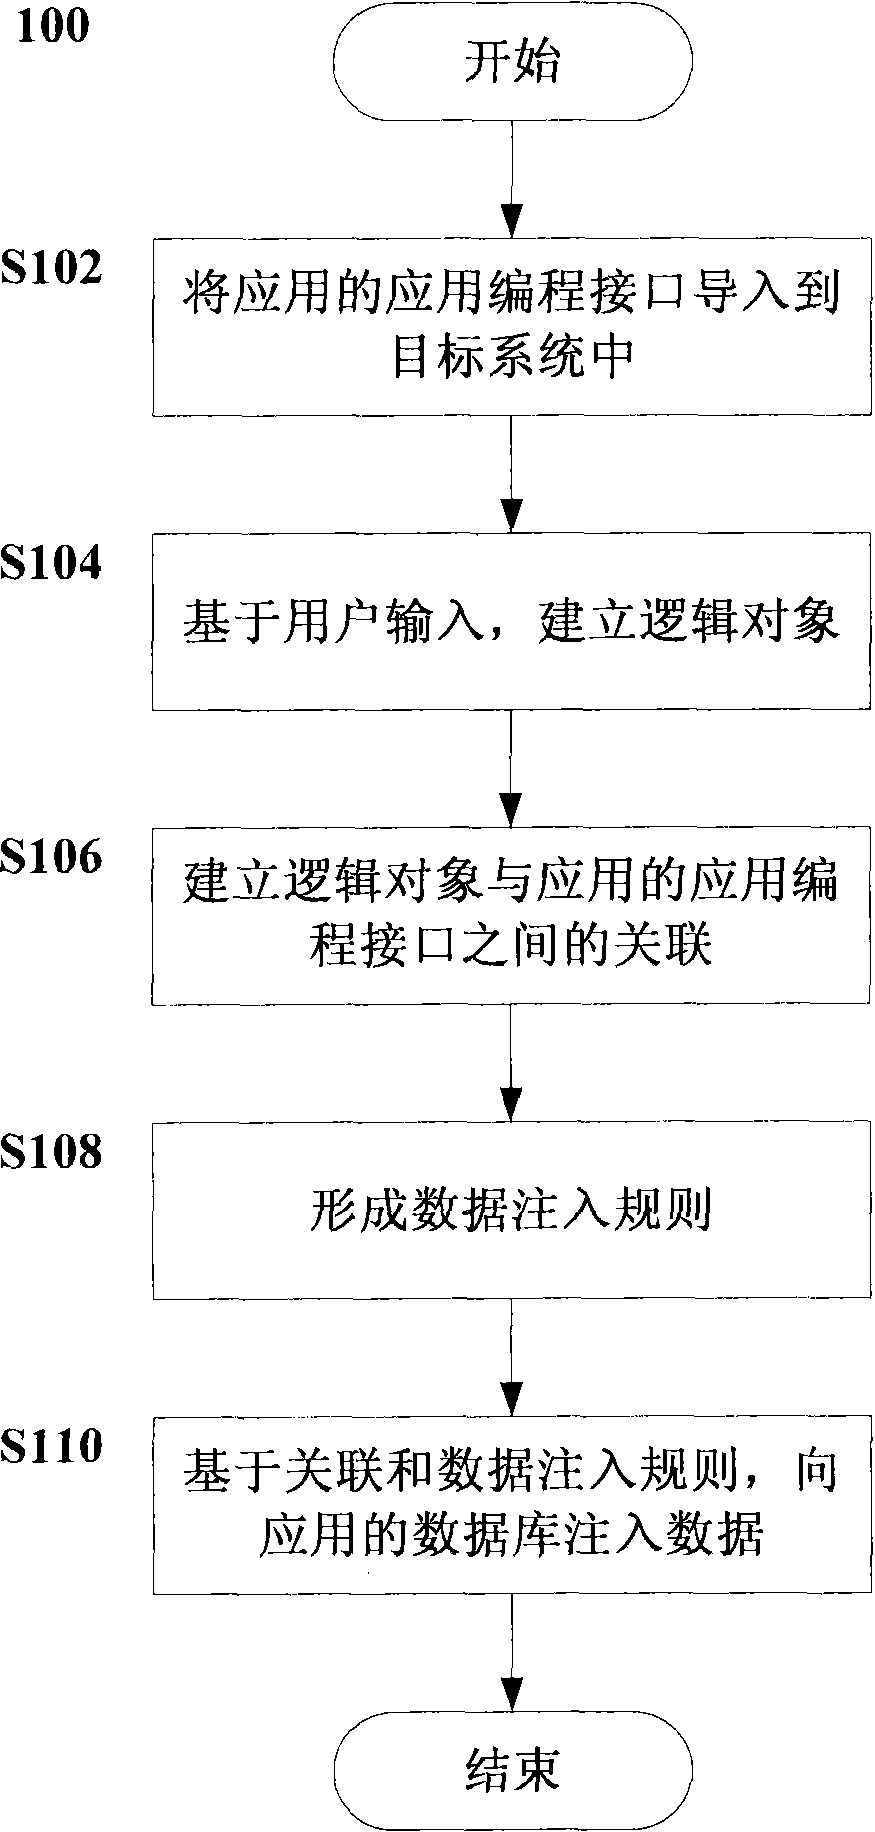 Method and equipment for injecting data into applied database